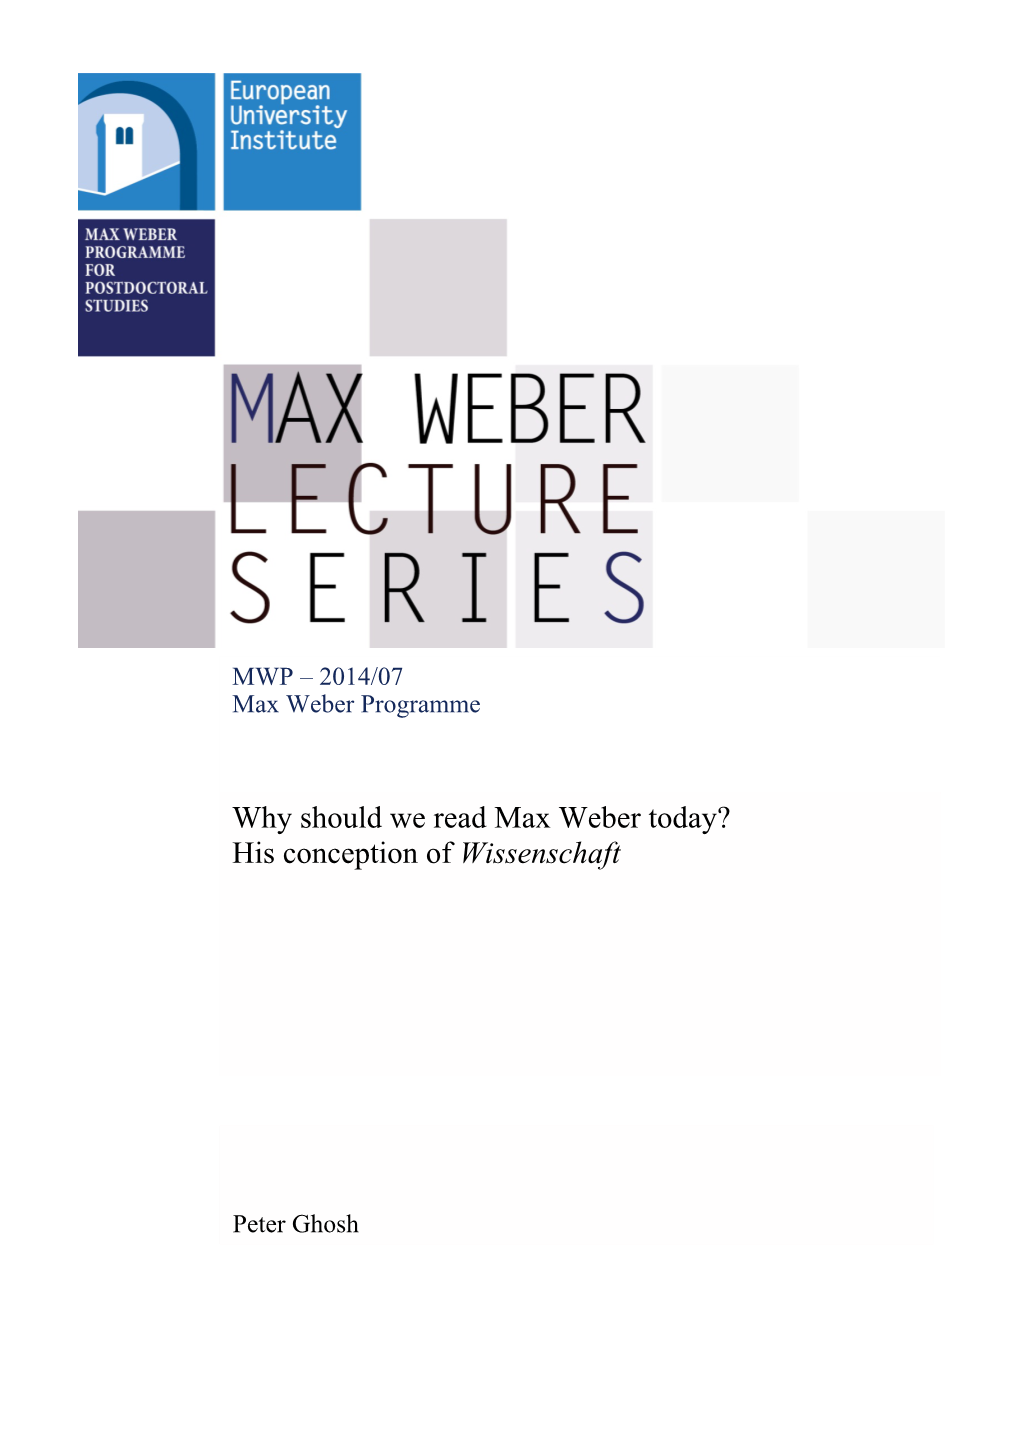 Why Should We Read Max Weber Today? His Conception of Wissenschaft